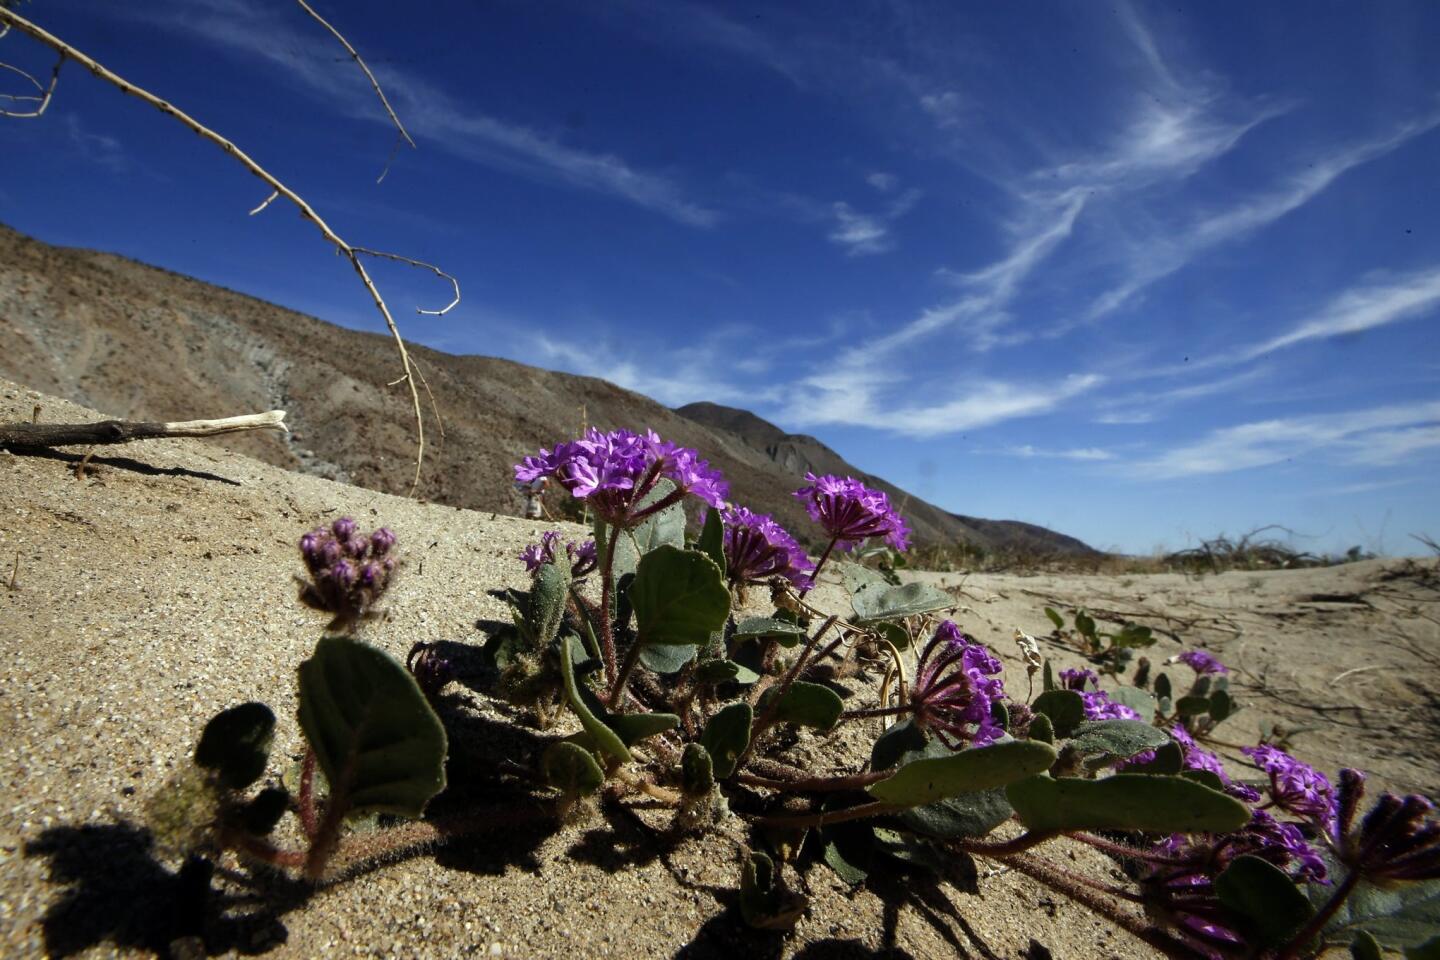 Desert flowers bloom in the state's largest park.